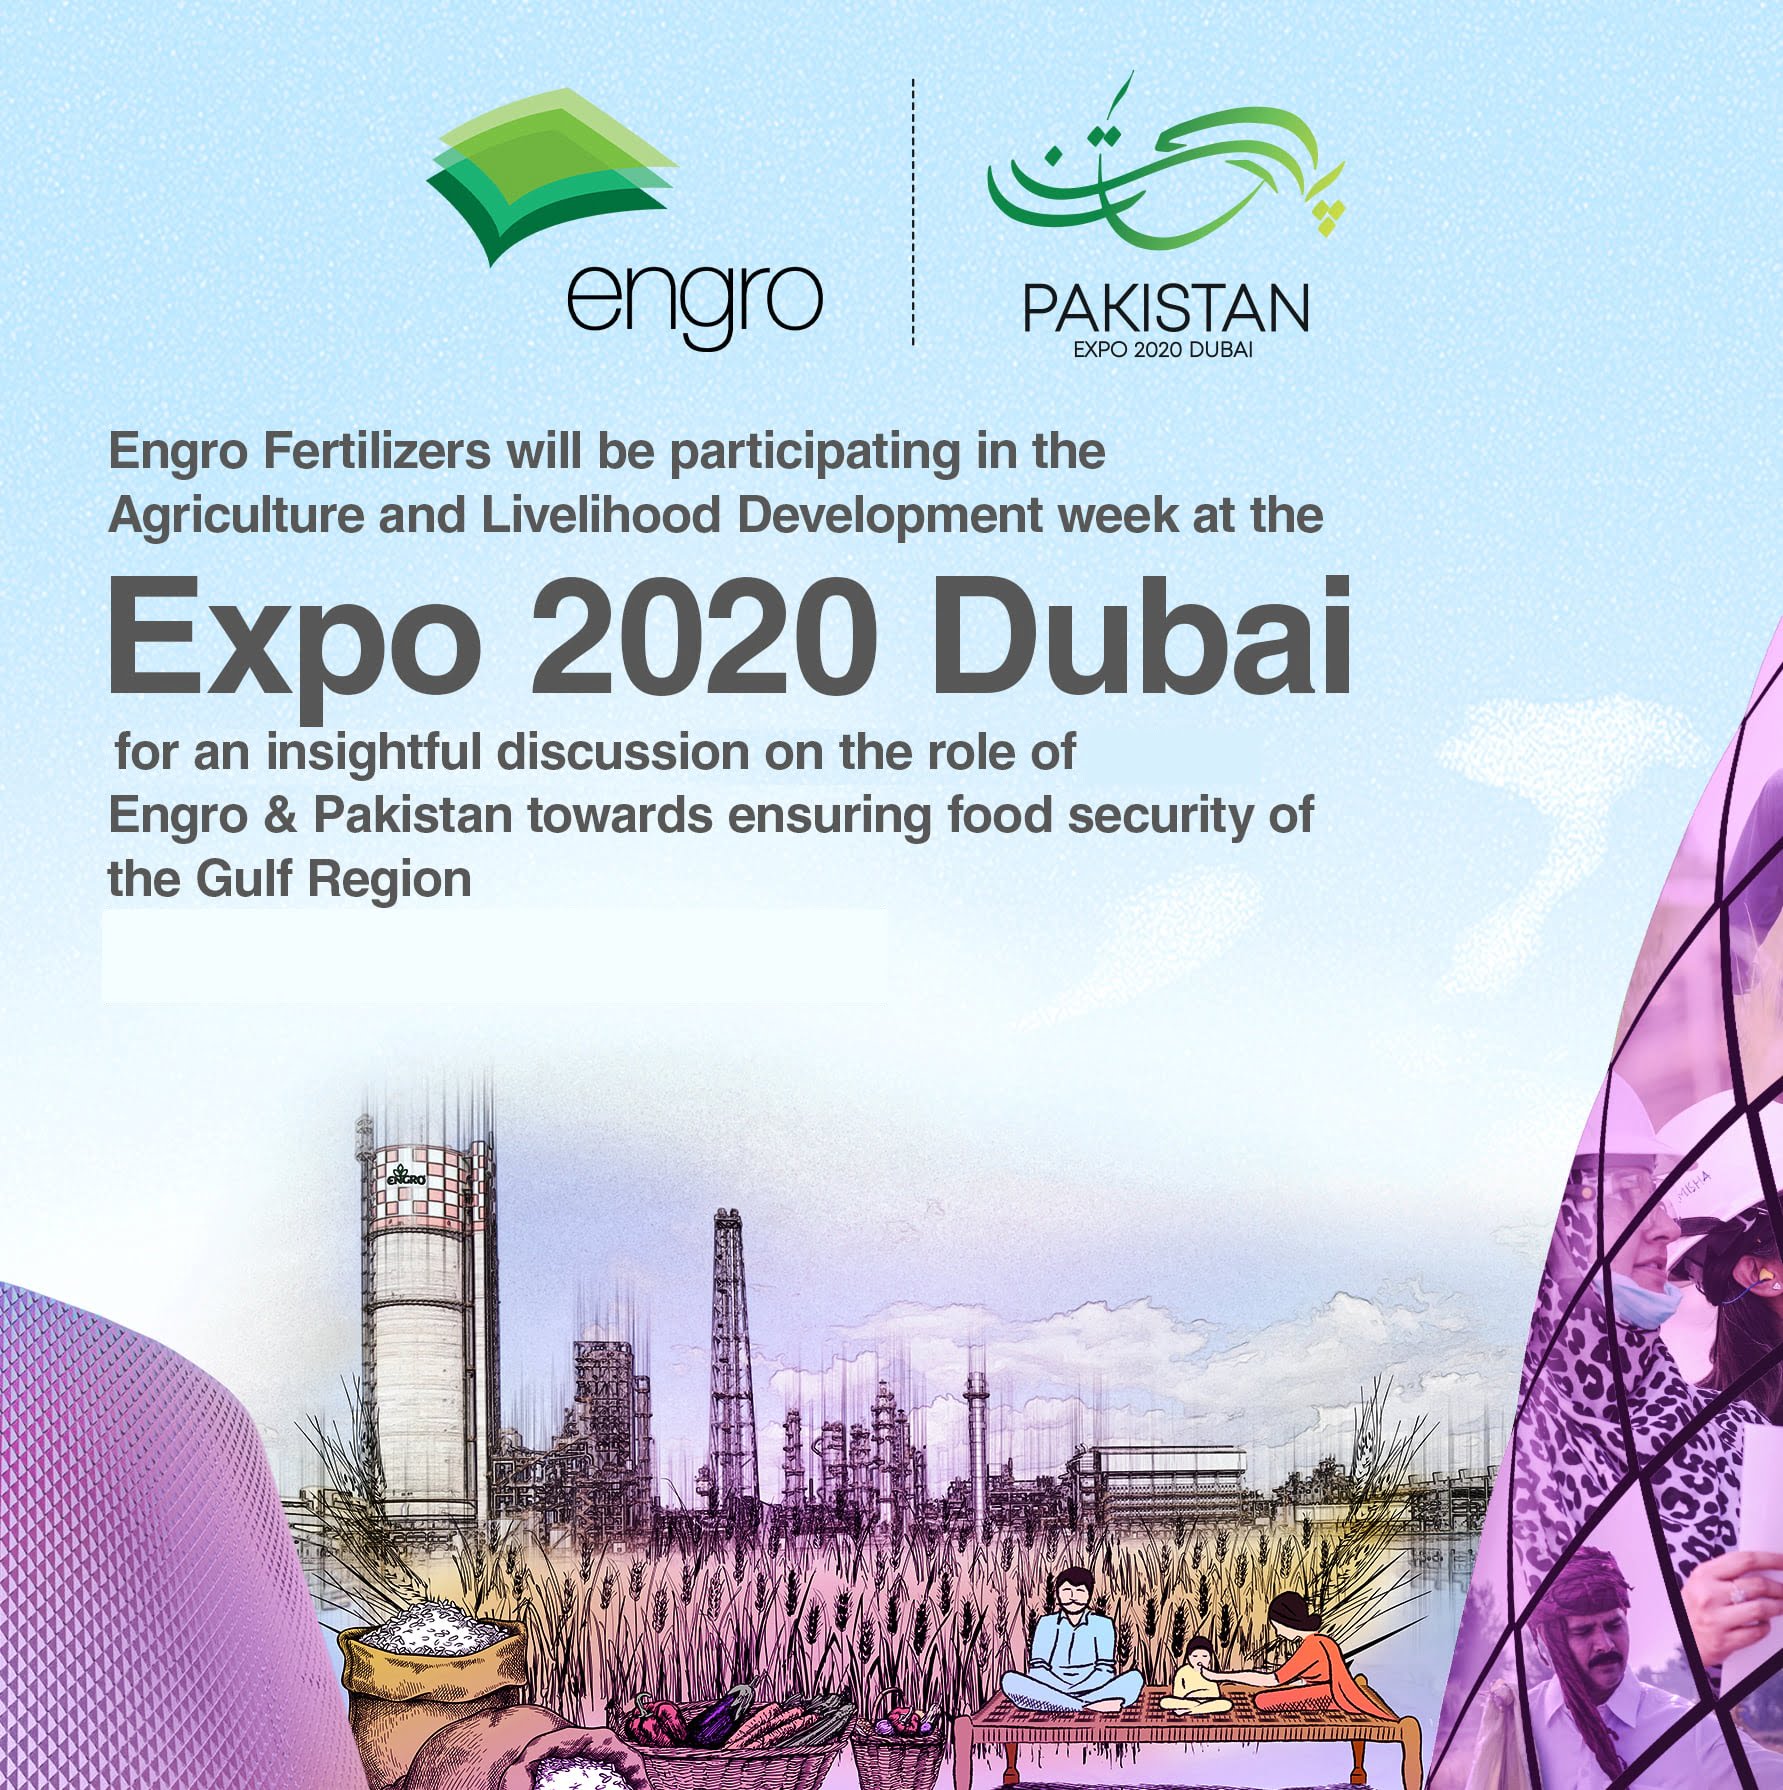 Engro Fertilizers highlights the role of Pakistan towards promoting regional food security at Expo 2020 Dubai